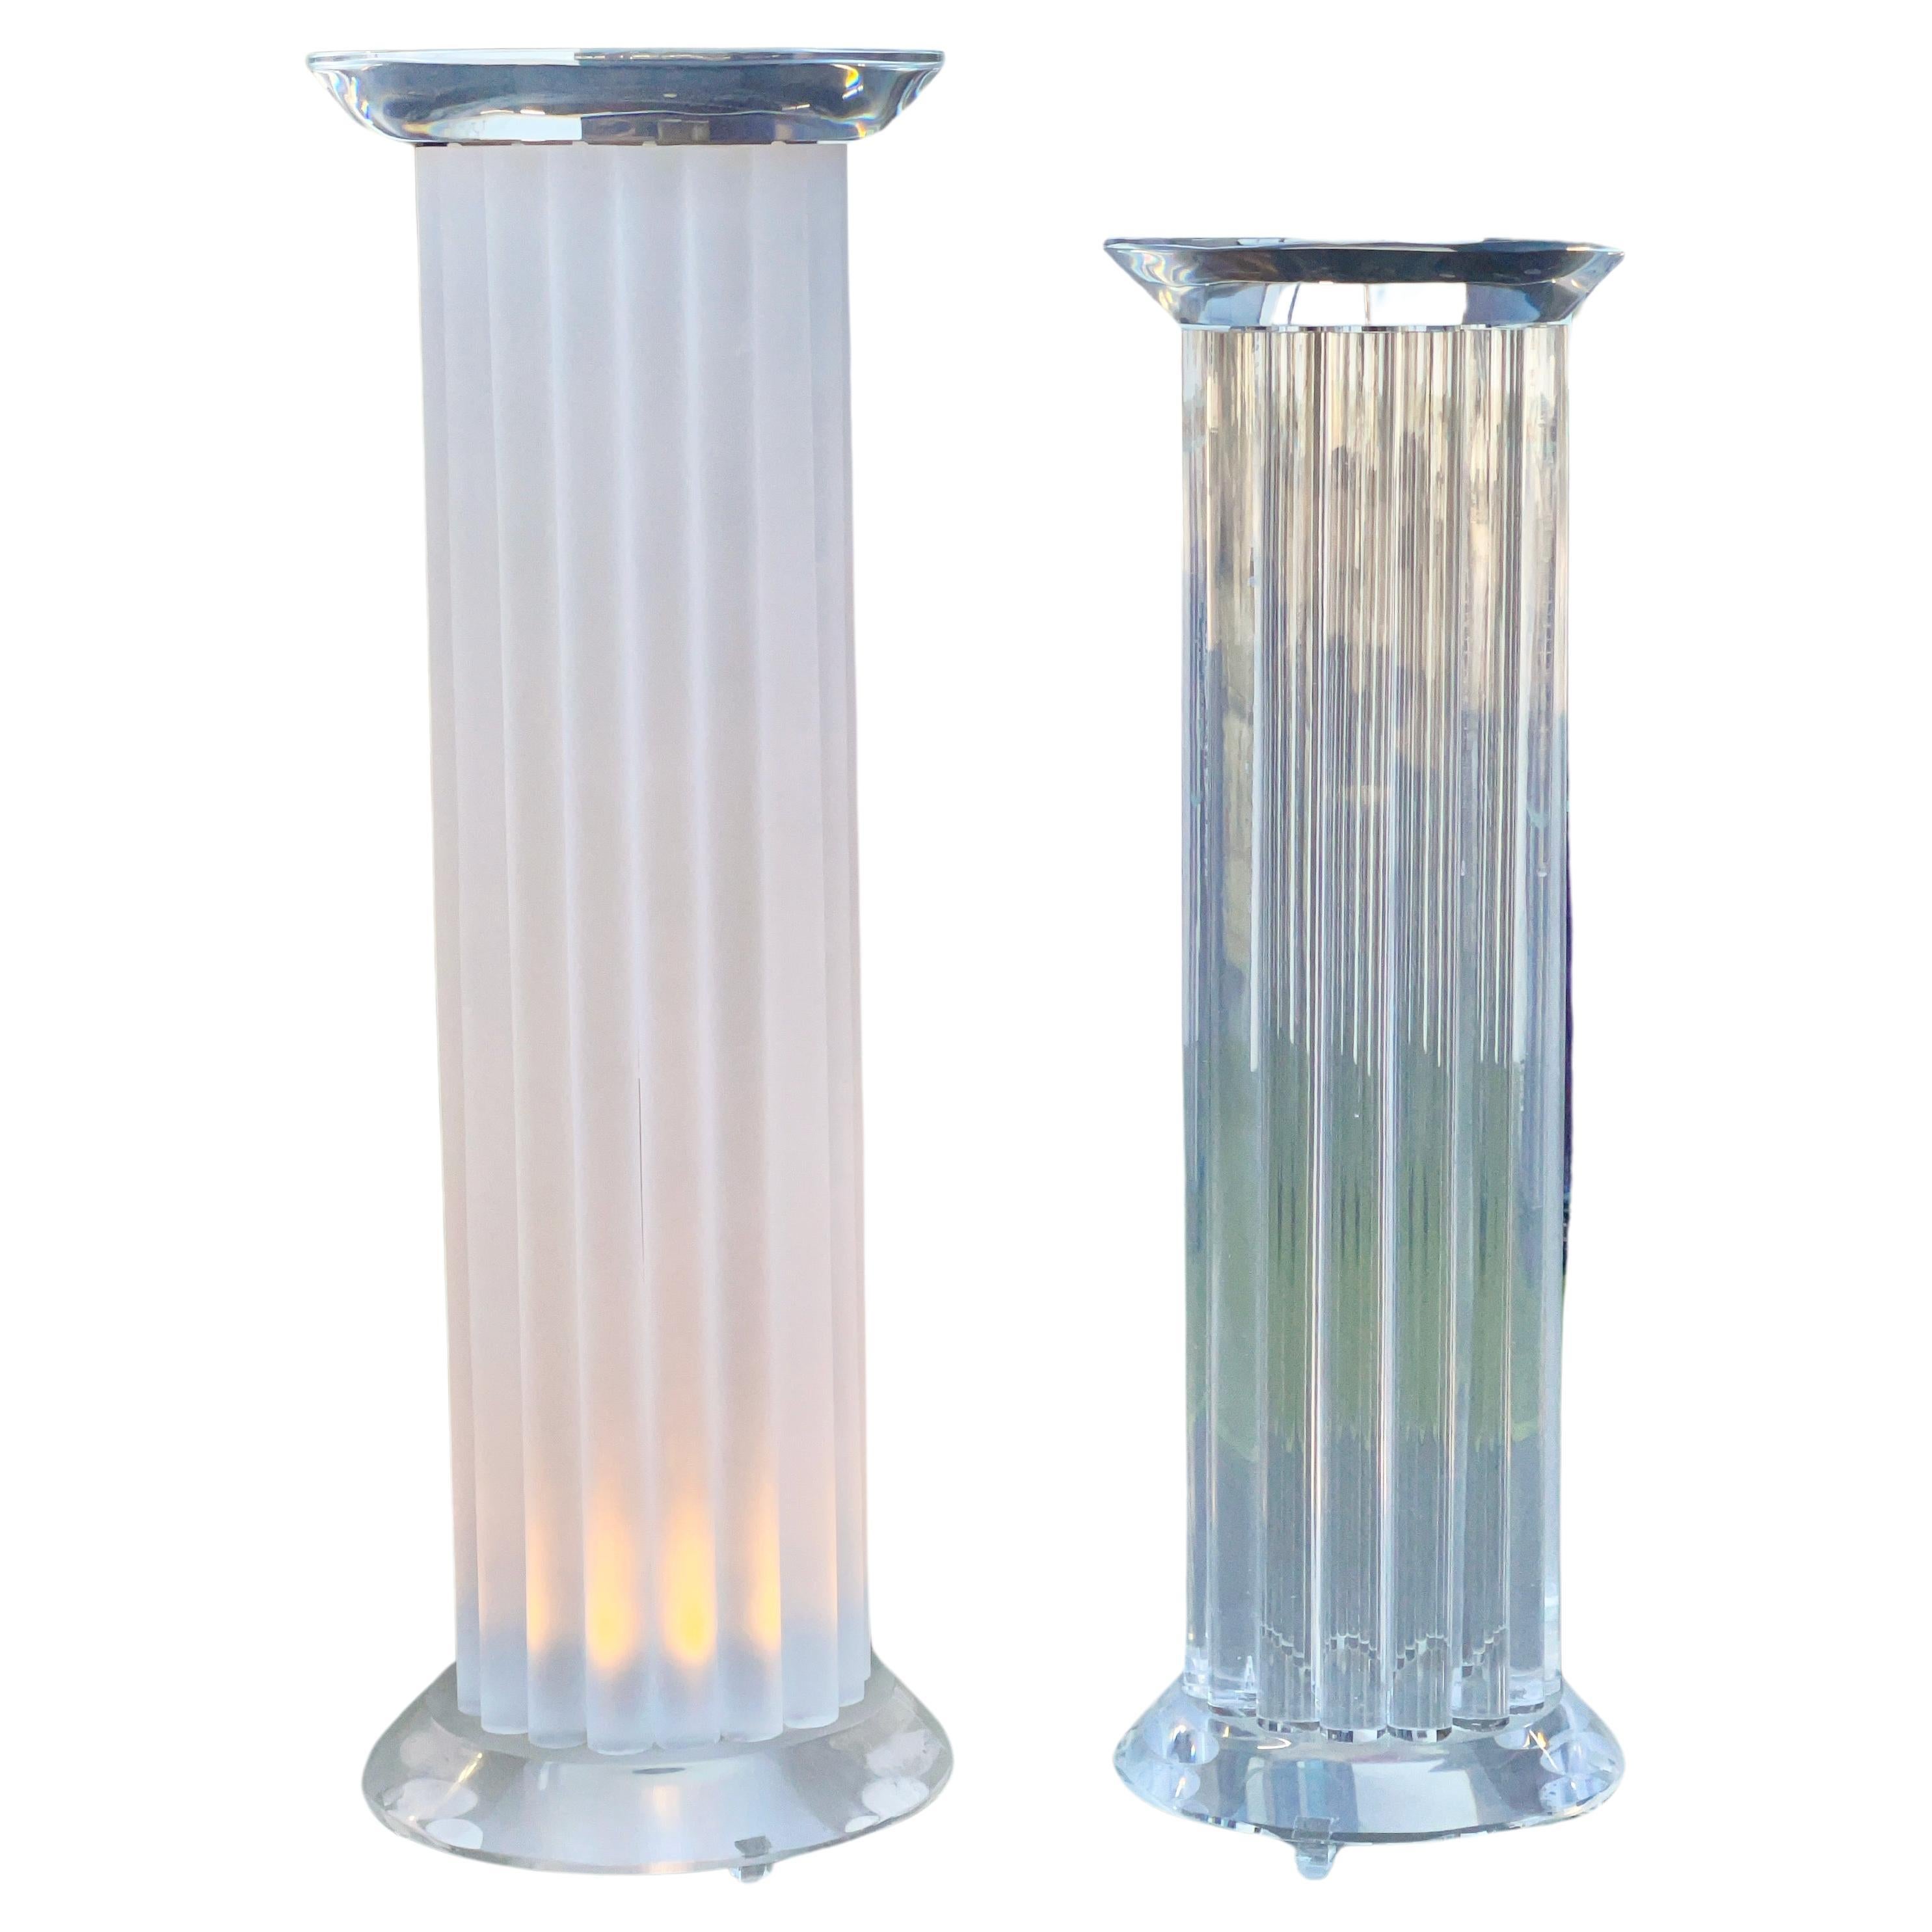 Two Illuminated Lucite Pedestal Display Columns For Sale